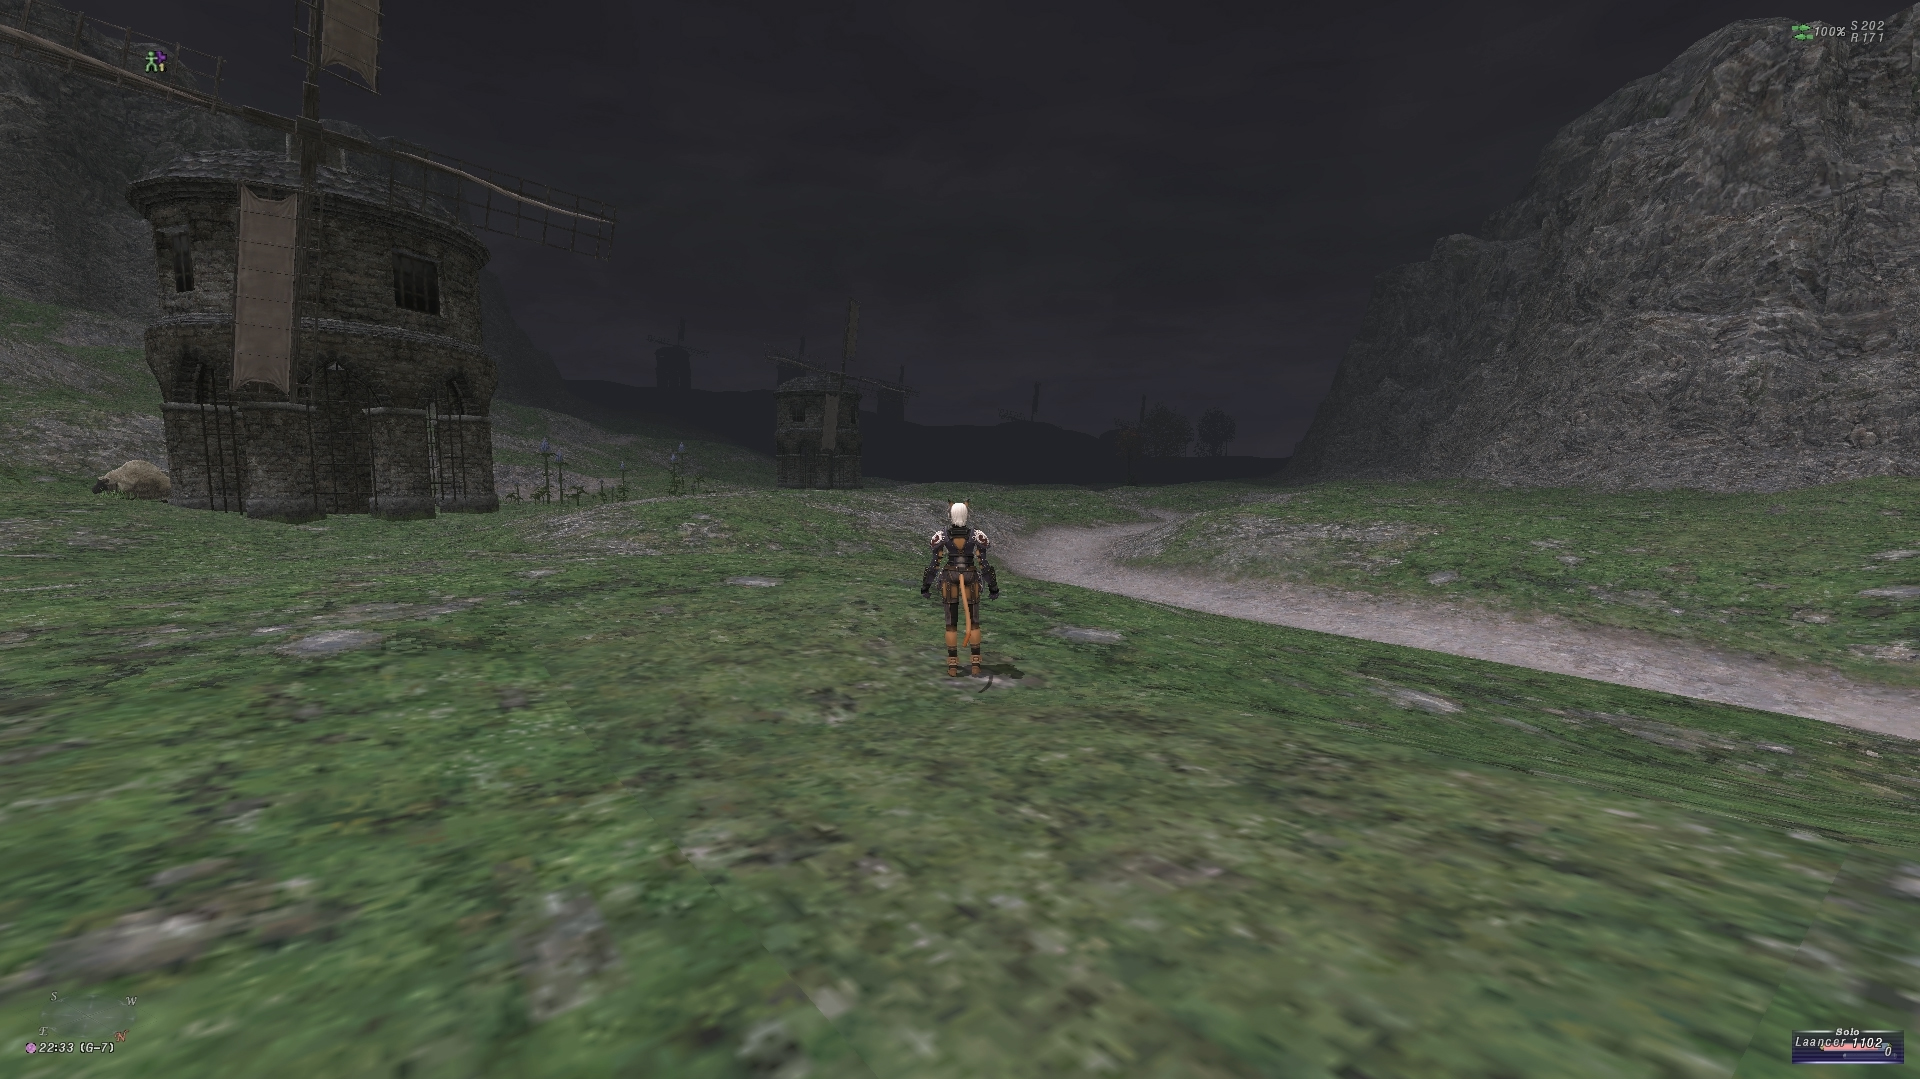 videogame character stands with back to camera. Decrepit windmills occupy the midground and background.